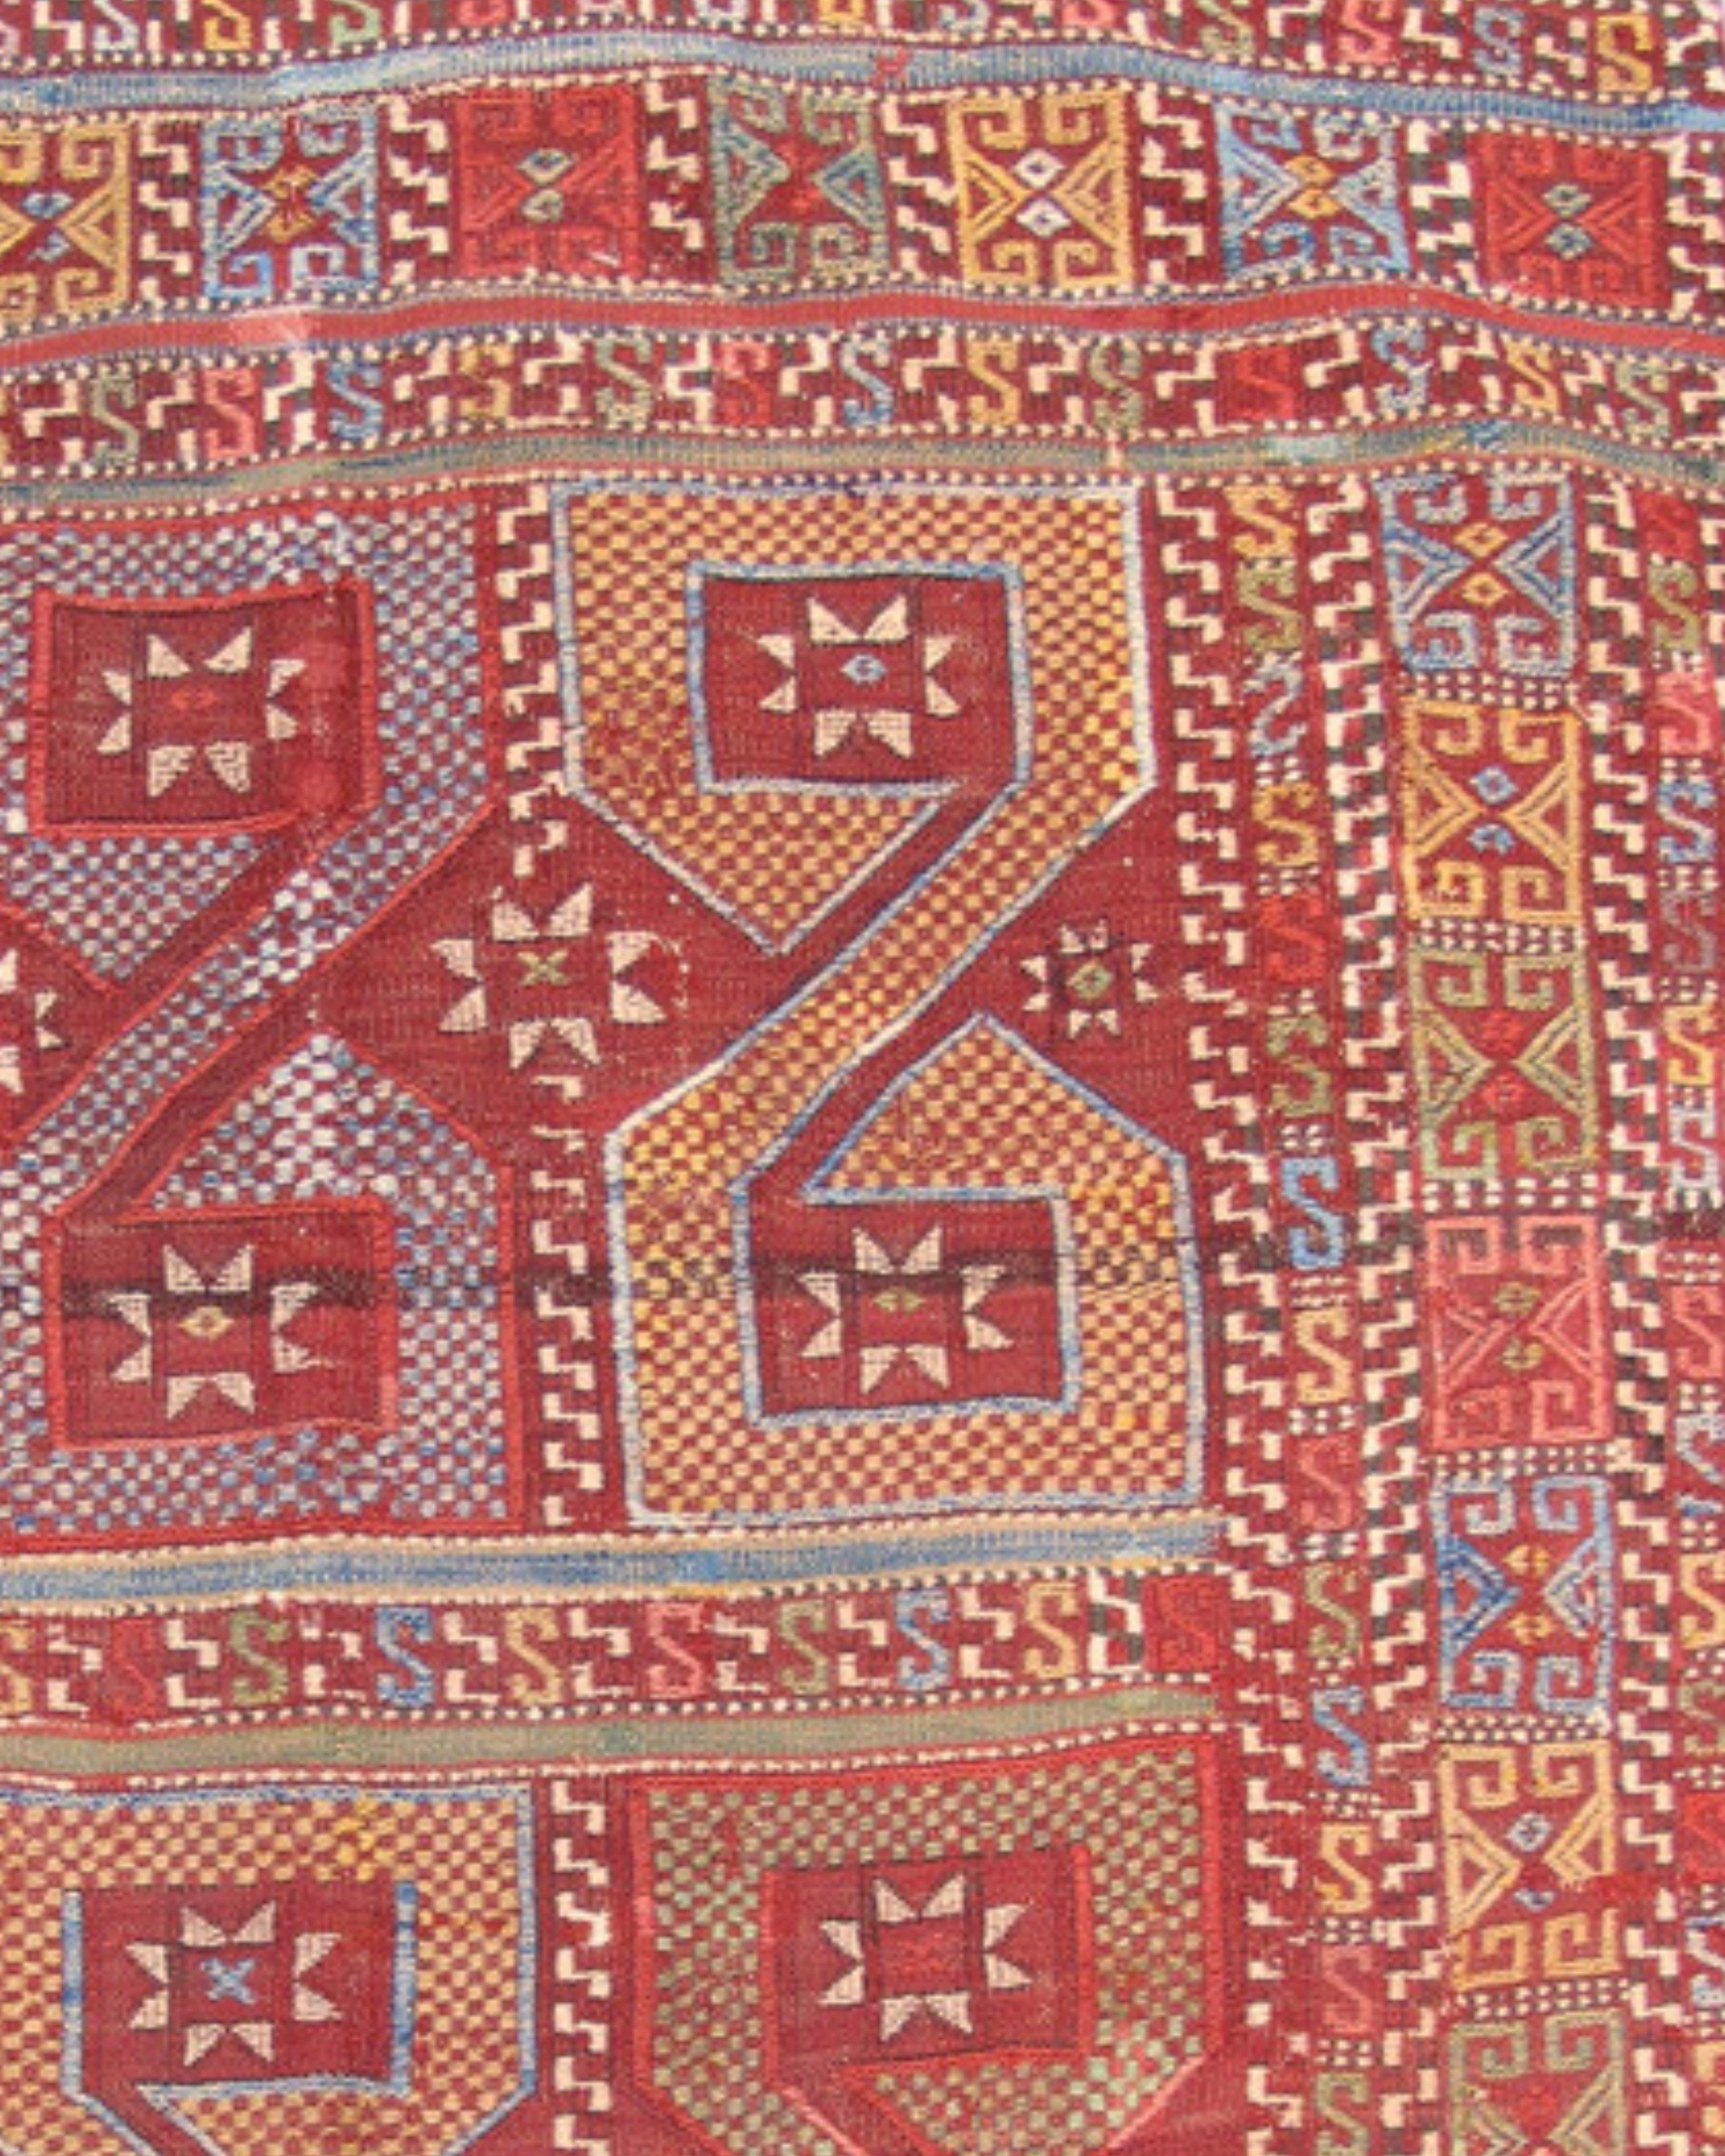 Antique Red Turkish Jajim Flat-Weave Rug, Mid-19th Century

Collection of Lucille A. Lamkin.

Additional Information
Dimensions: 
Origin: Anatolia (Turkey)
Period: Mid-19th Century
Rug ID: 16360